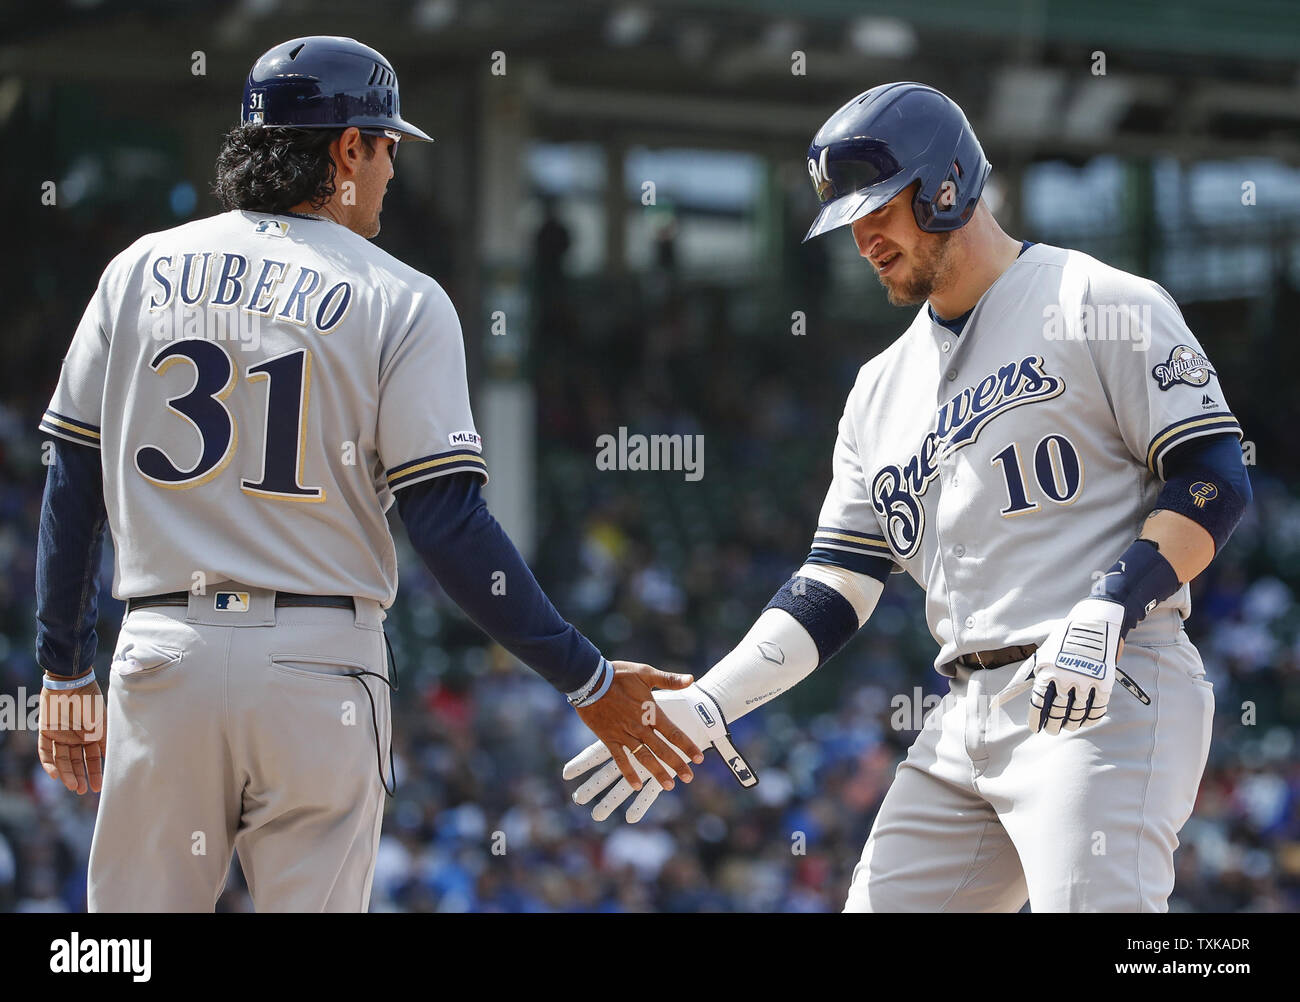 Milwaukee Brewers' Yasmani Grandal (R) celebrates with first base coach Carlos Subero (L) after hitting a single against the Chicago Cubs in the seventh inning at Wrigley Field on May 10, 2019 in Chicago. Photo by Kamil Krzaczynski/UPI Stock Photo